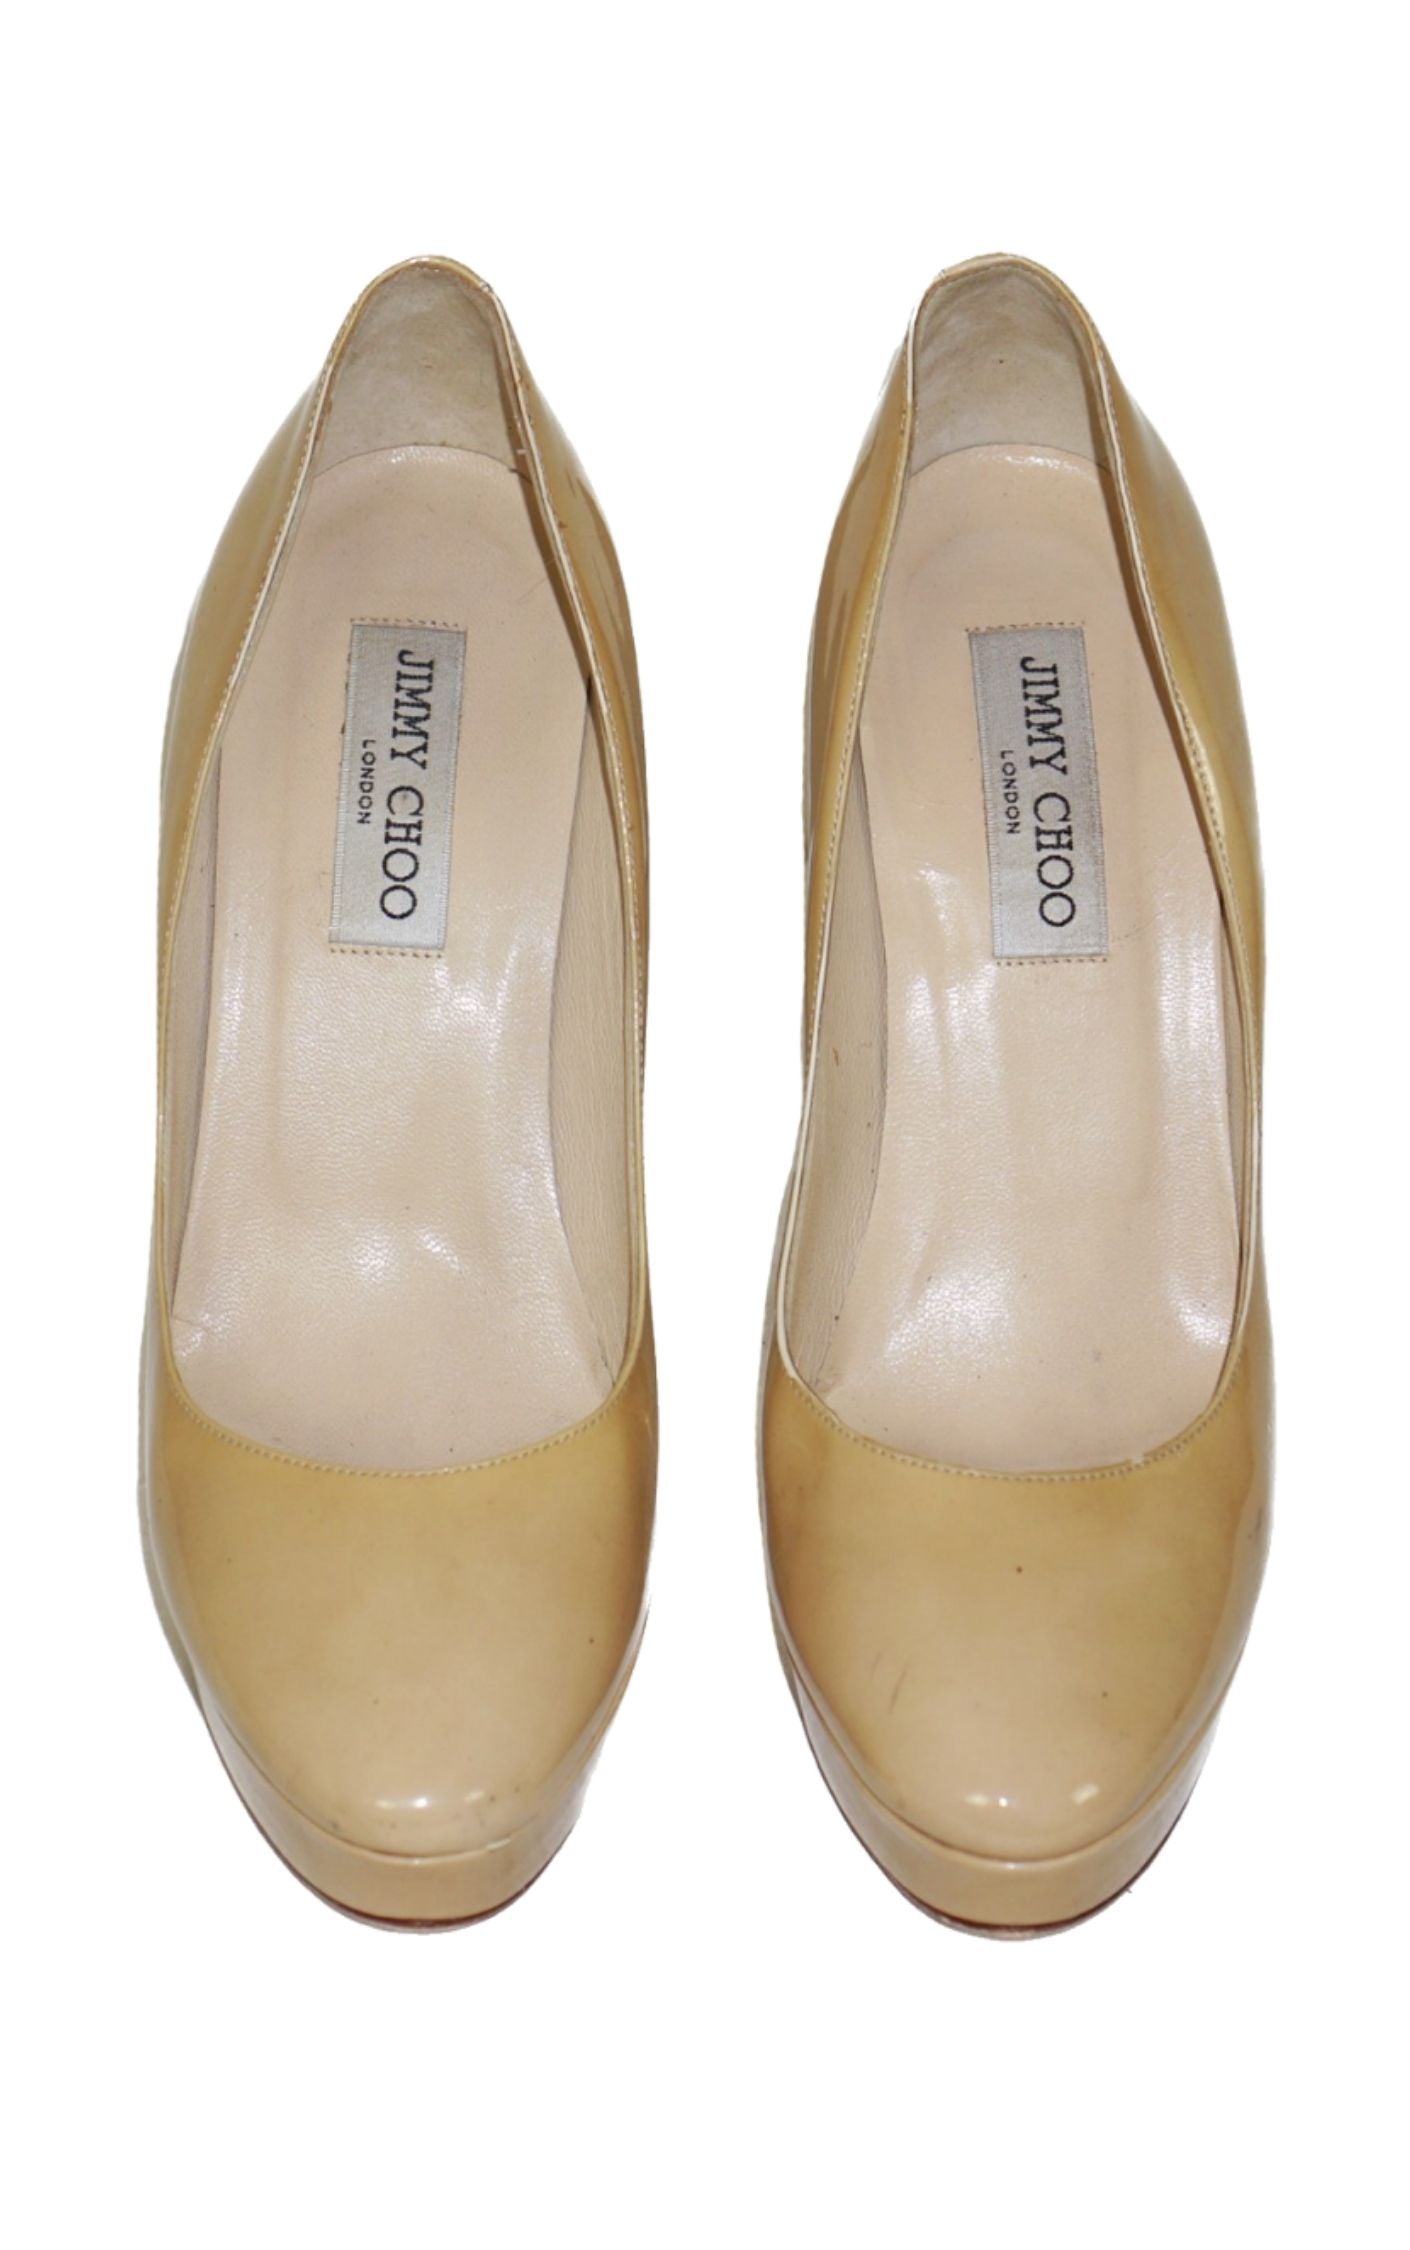 JIMMY CHOO Nude Patent Leather Heeled Pumps RESELLUM